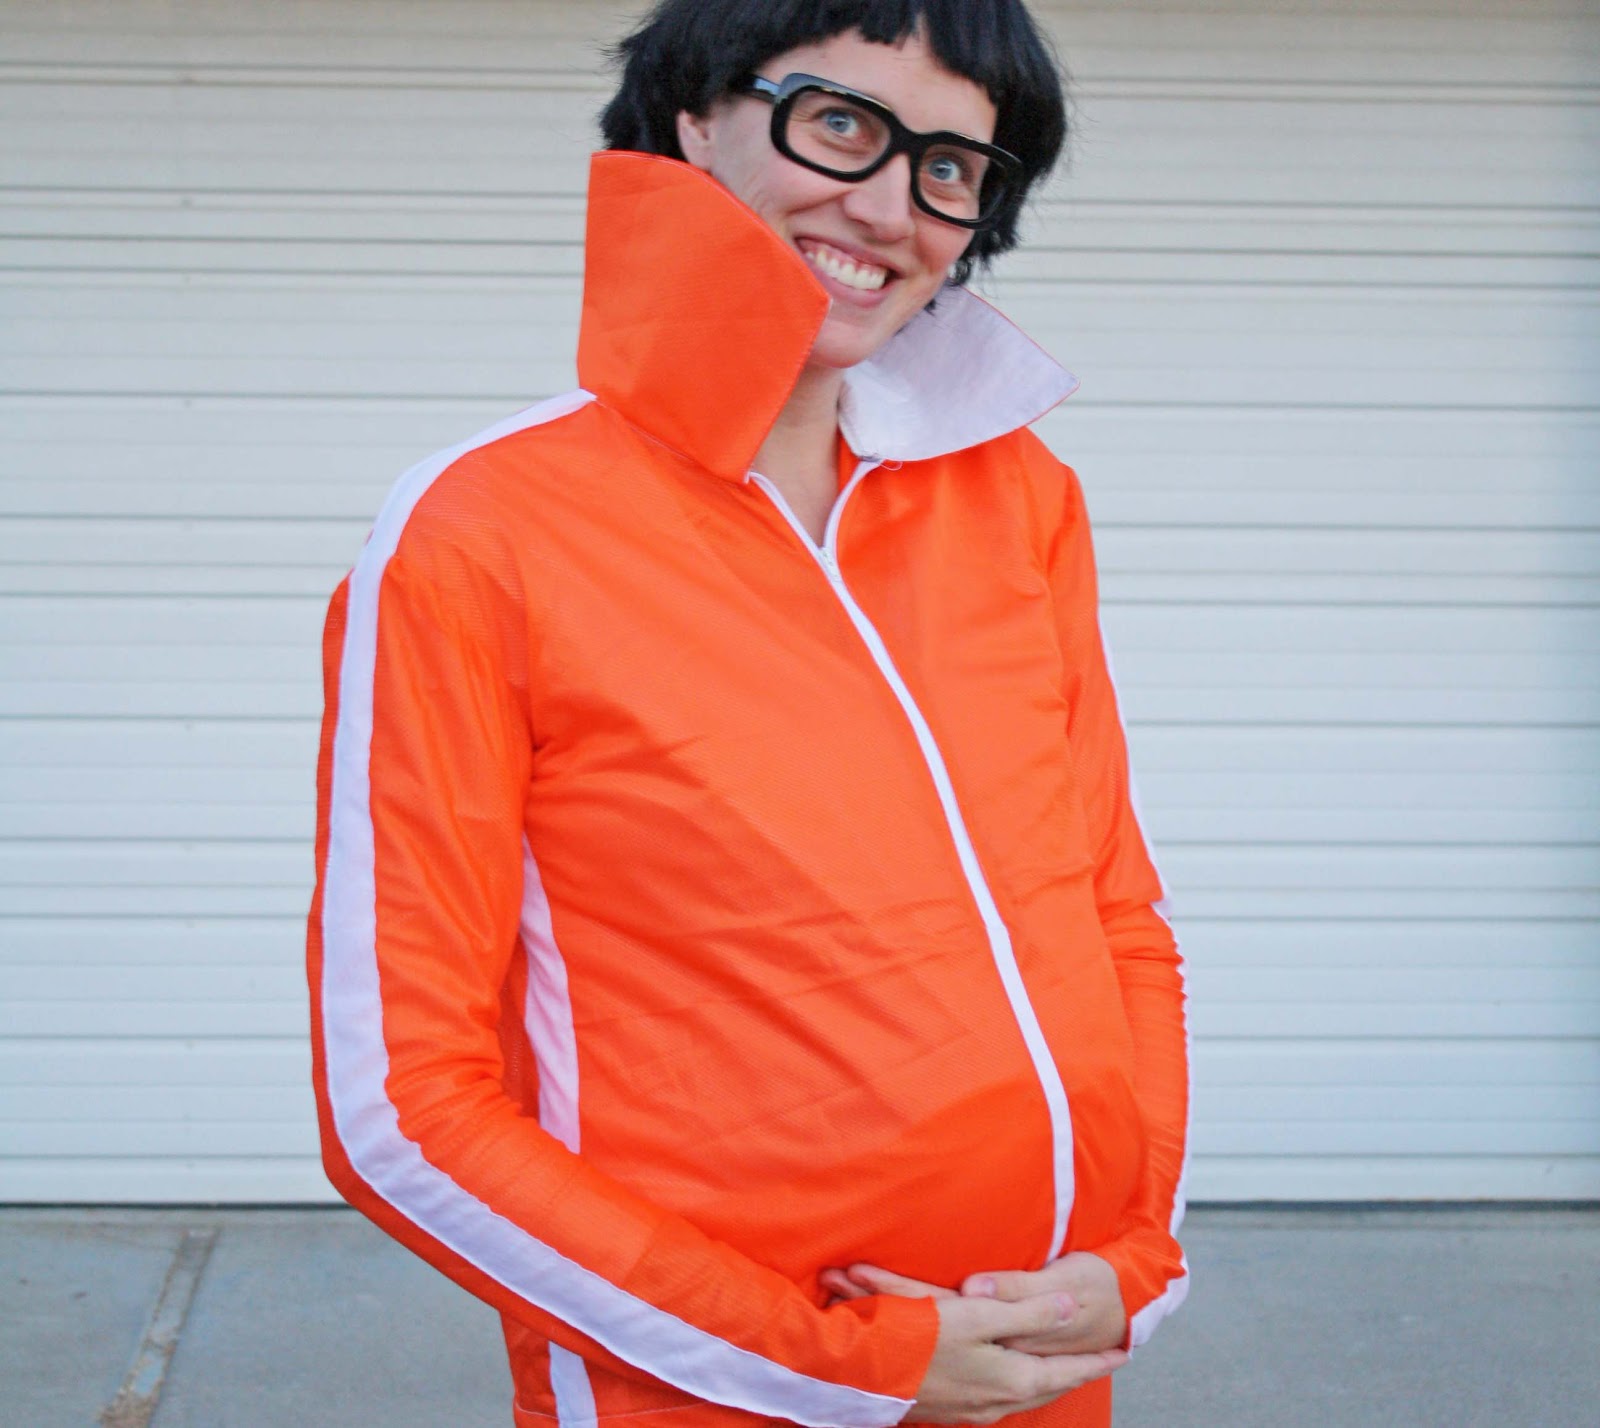 Lol pellet Say aside Running With Scissors: Despicable Me and Maternity Halloween Costume